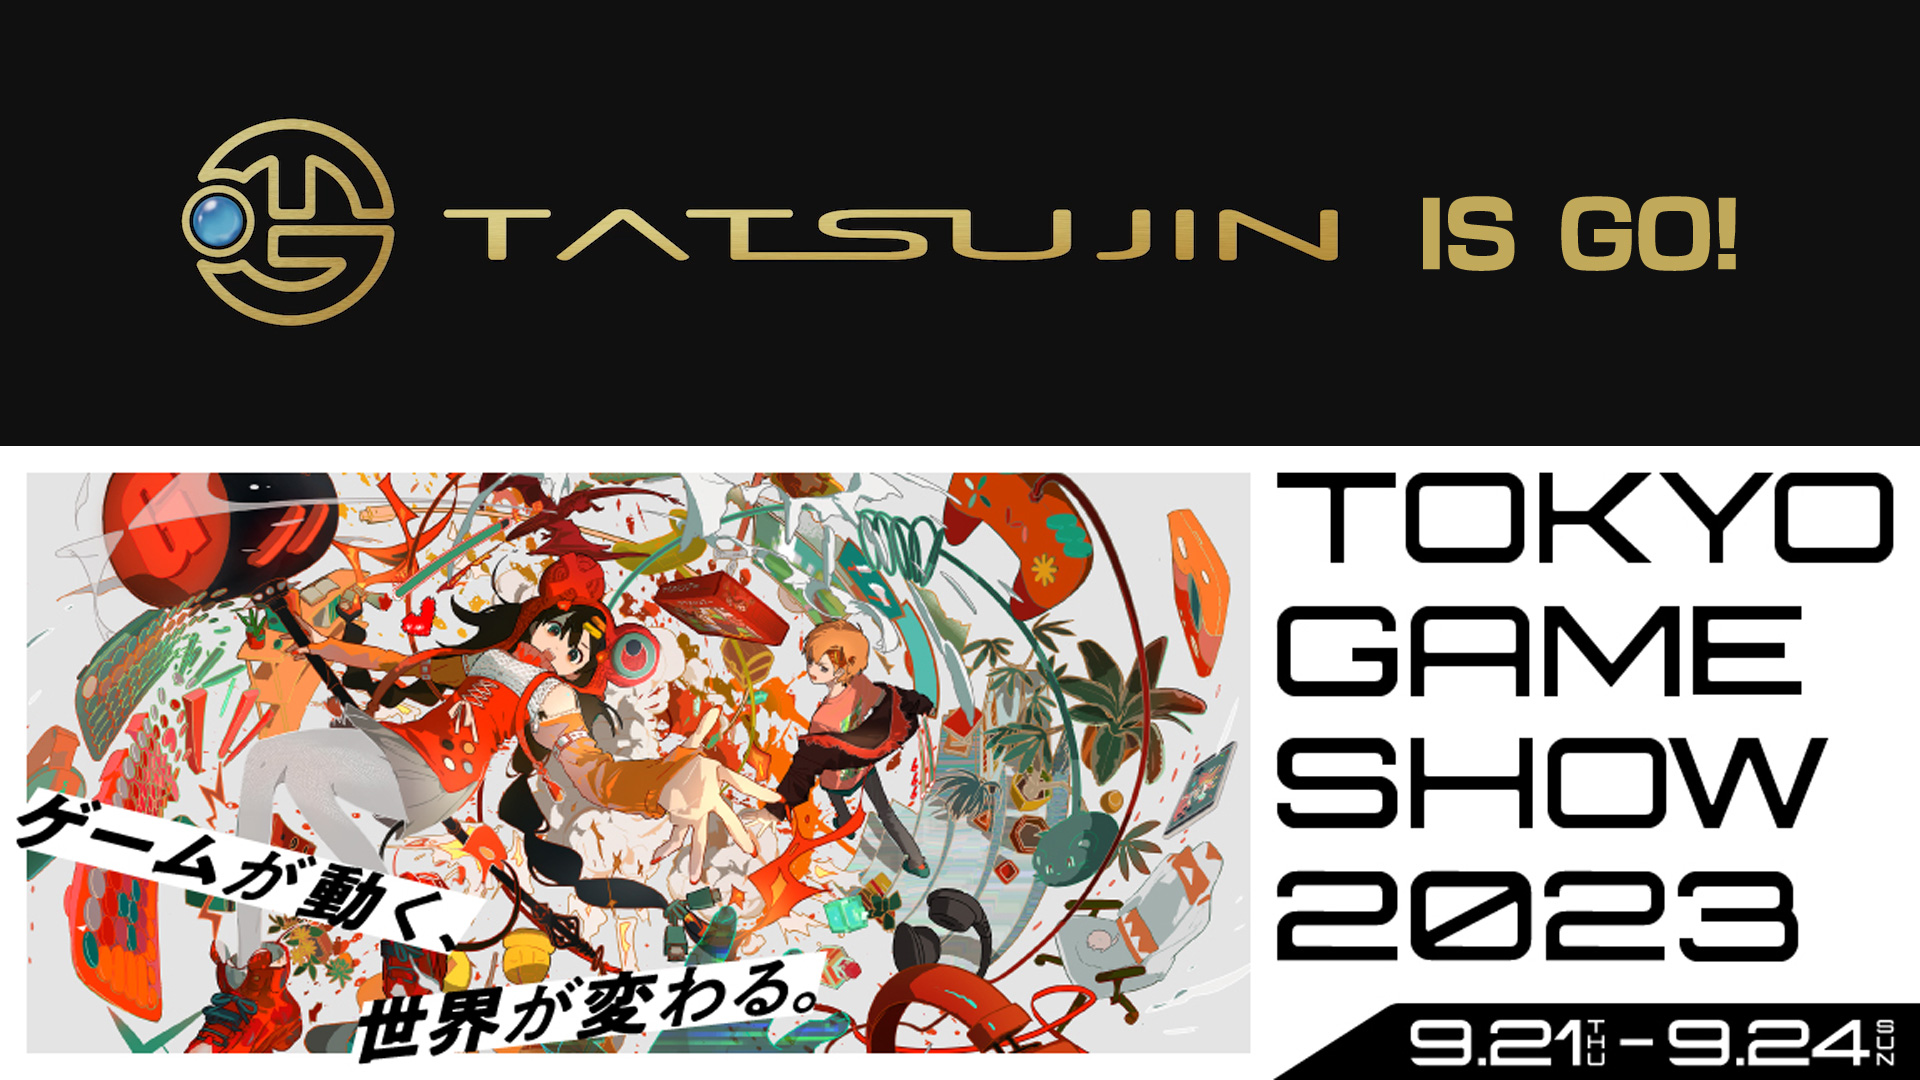 Vol. 2 of "Toaplan Arcade Shoot 'Em Ups" to be released on August 24!